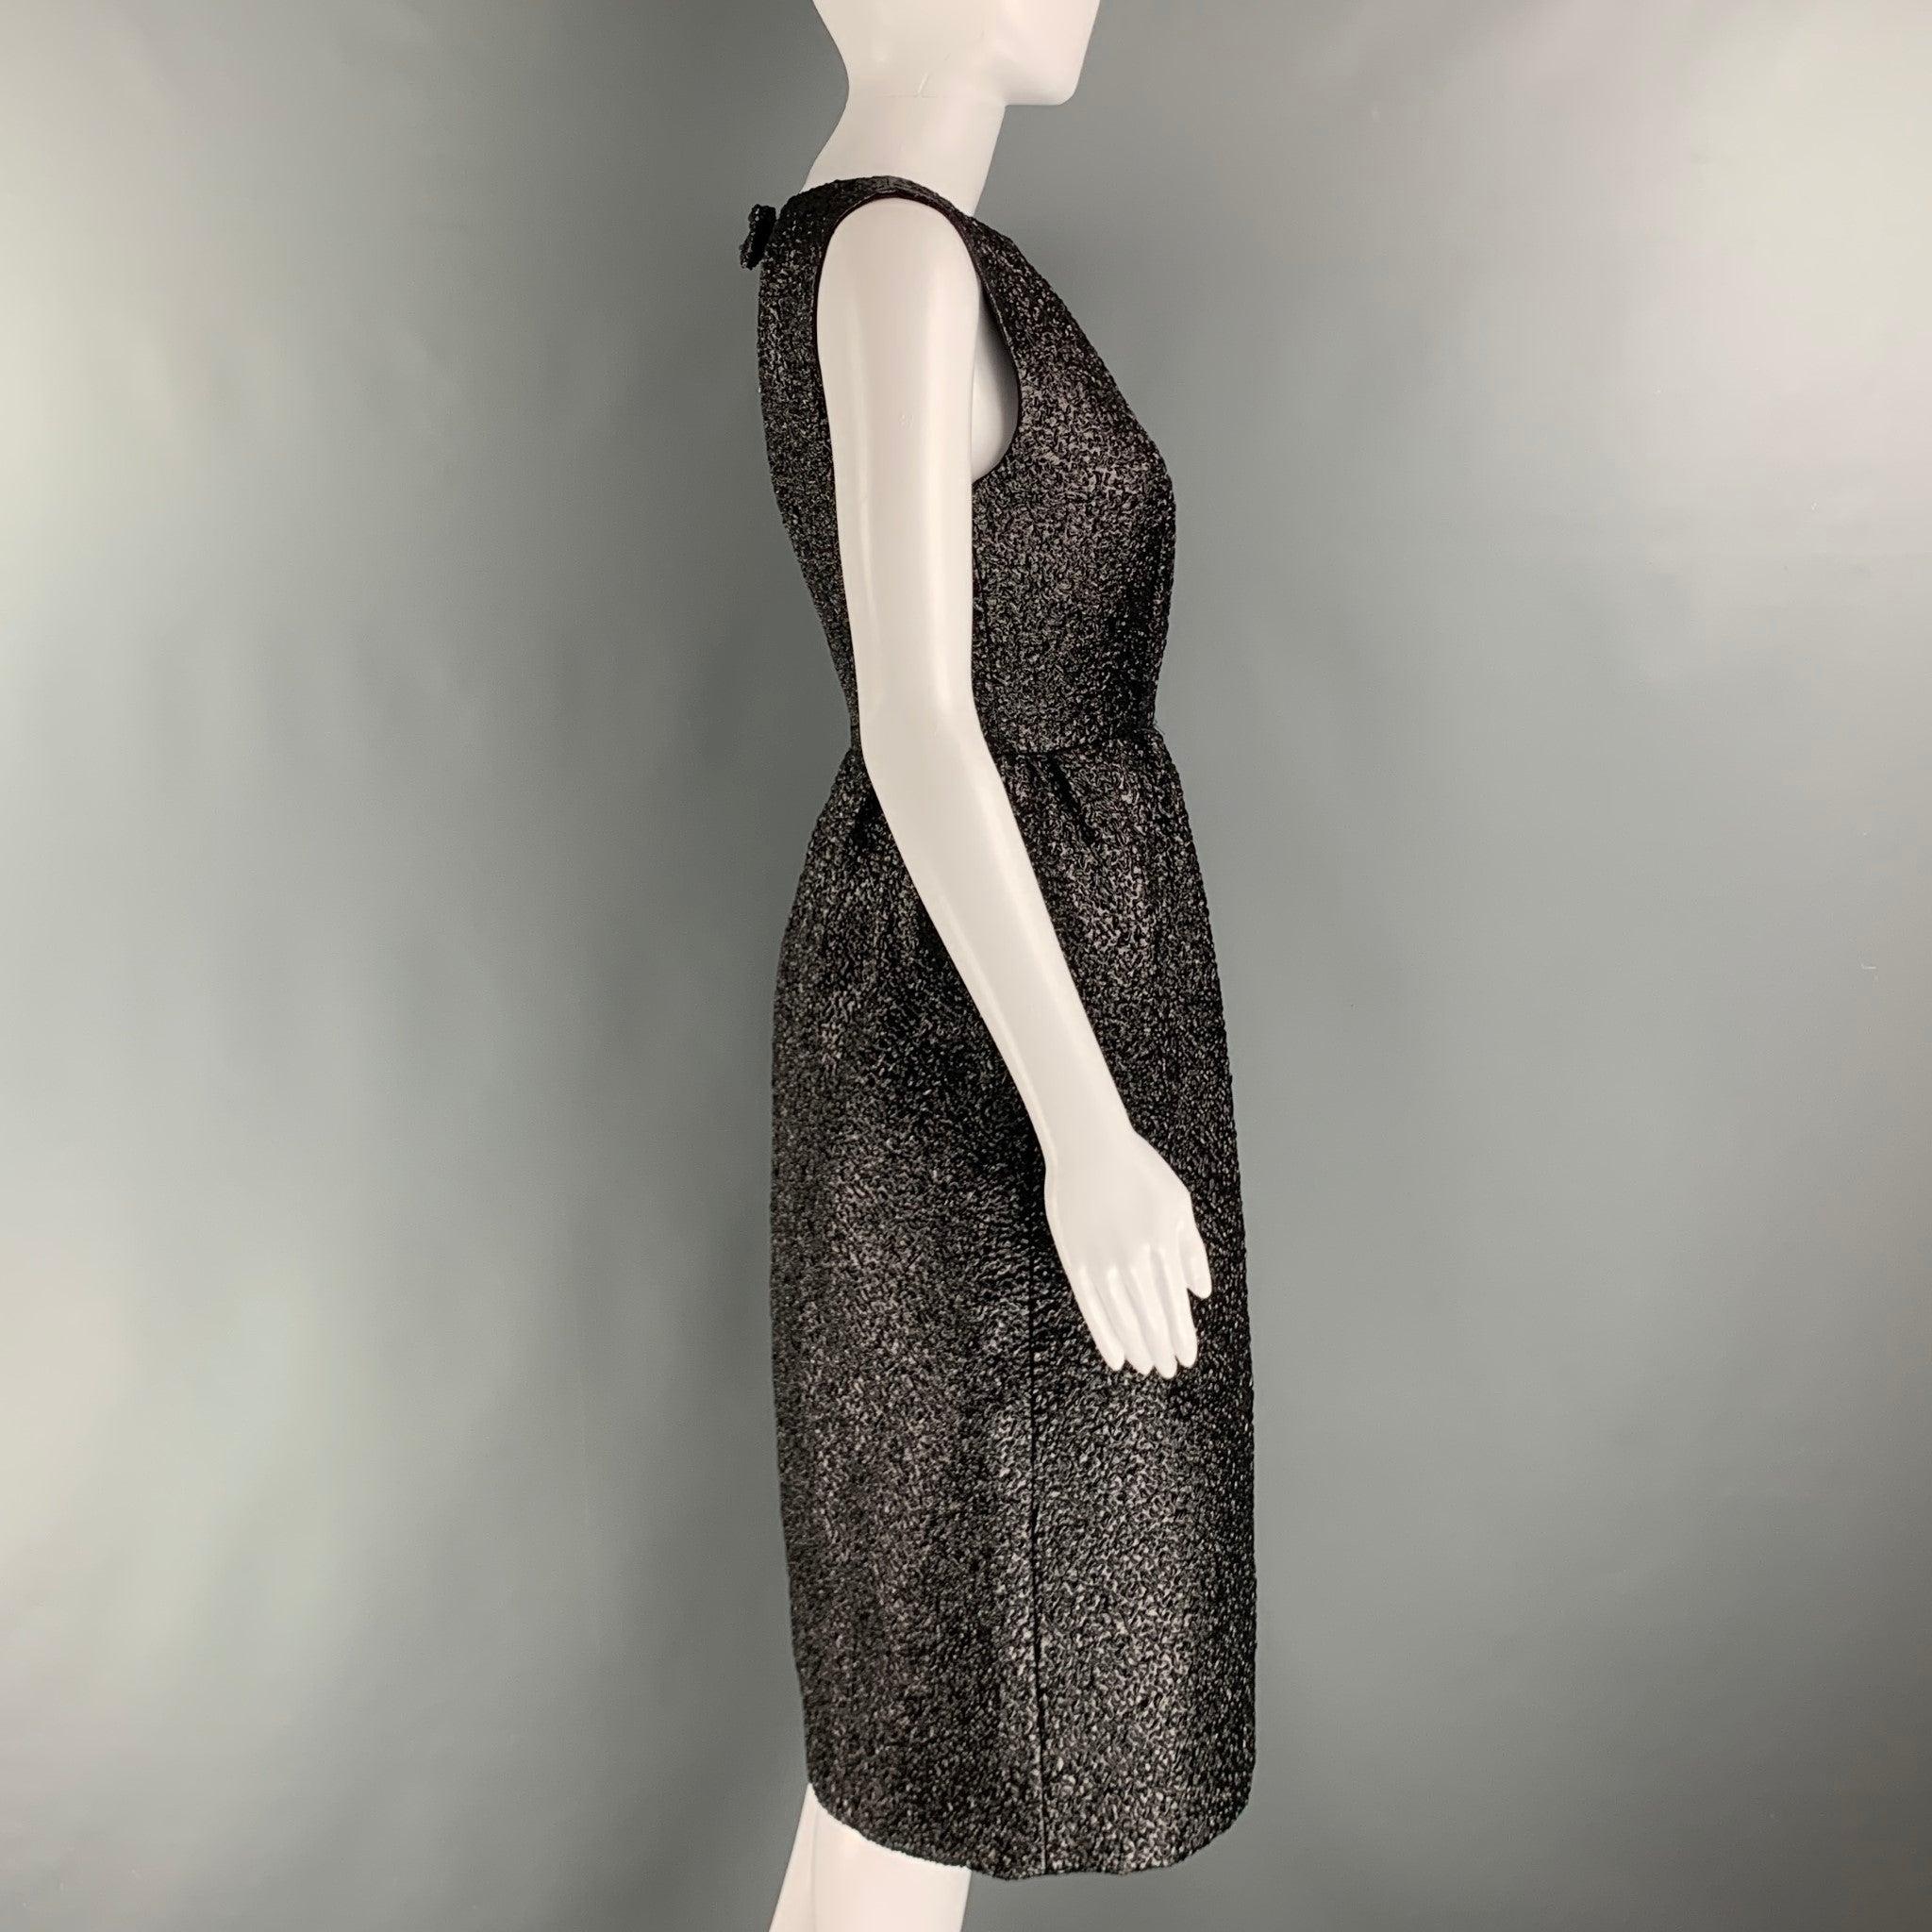 MARC JACOBS Size 0 Black Polyester Blend Textured Shift Dress In Excellent Condition For Sale In San Francisco, CA